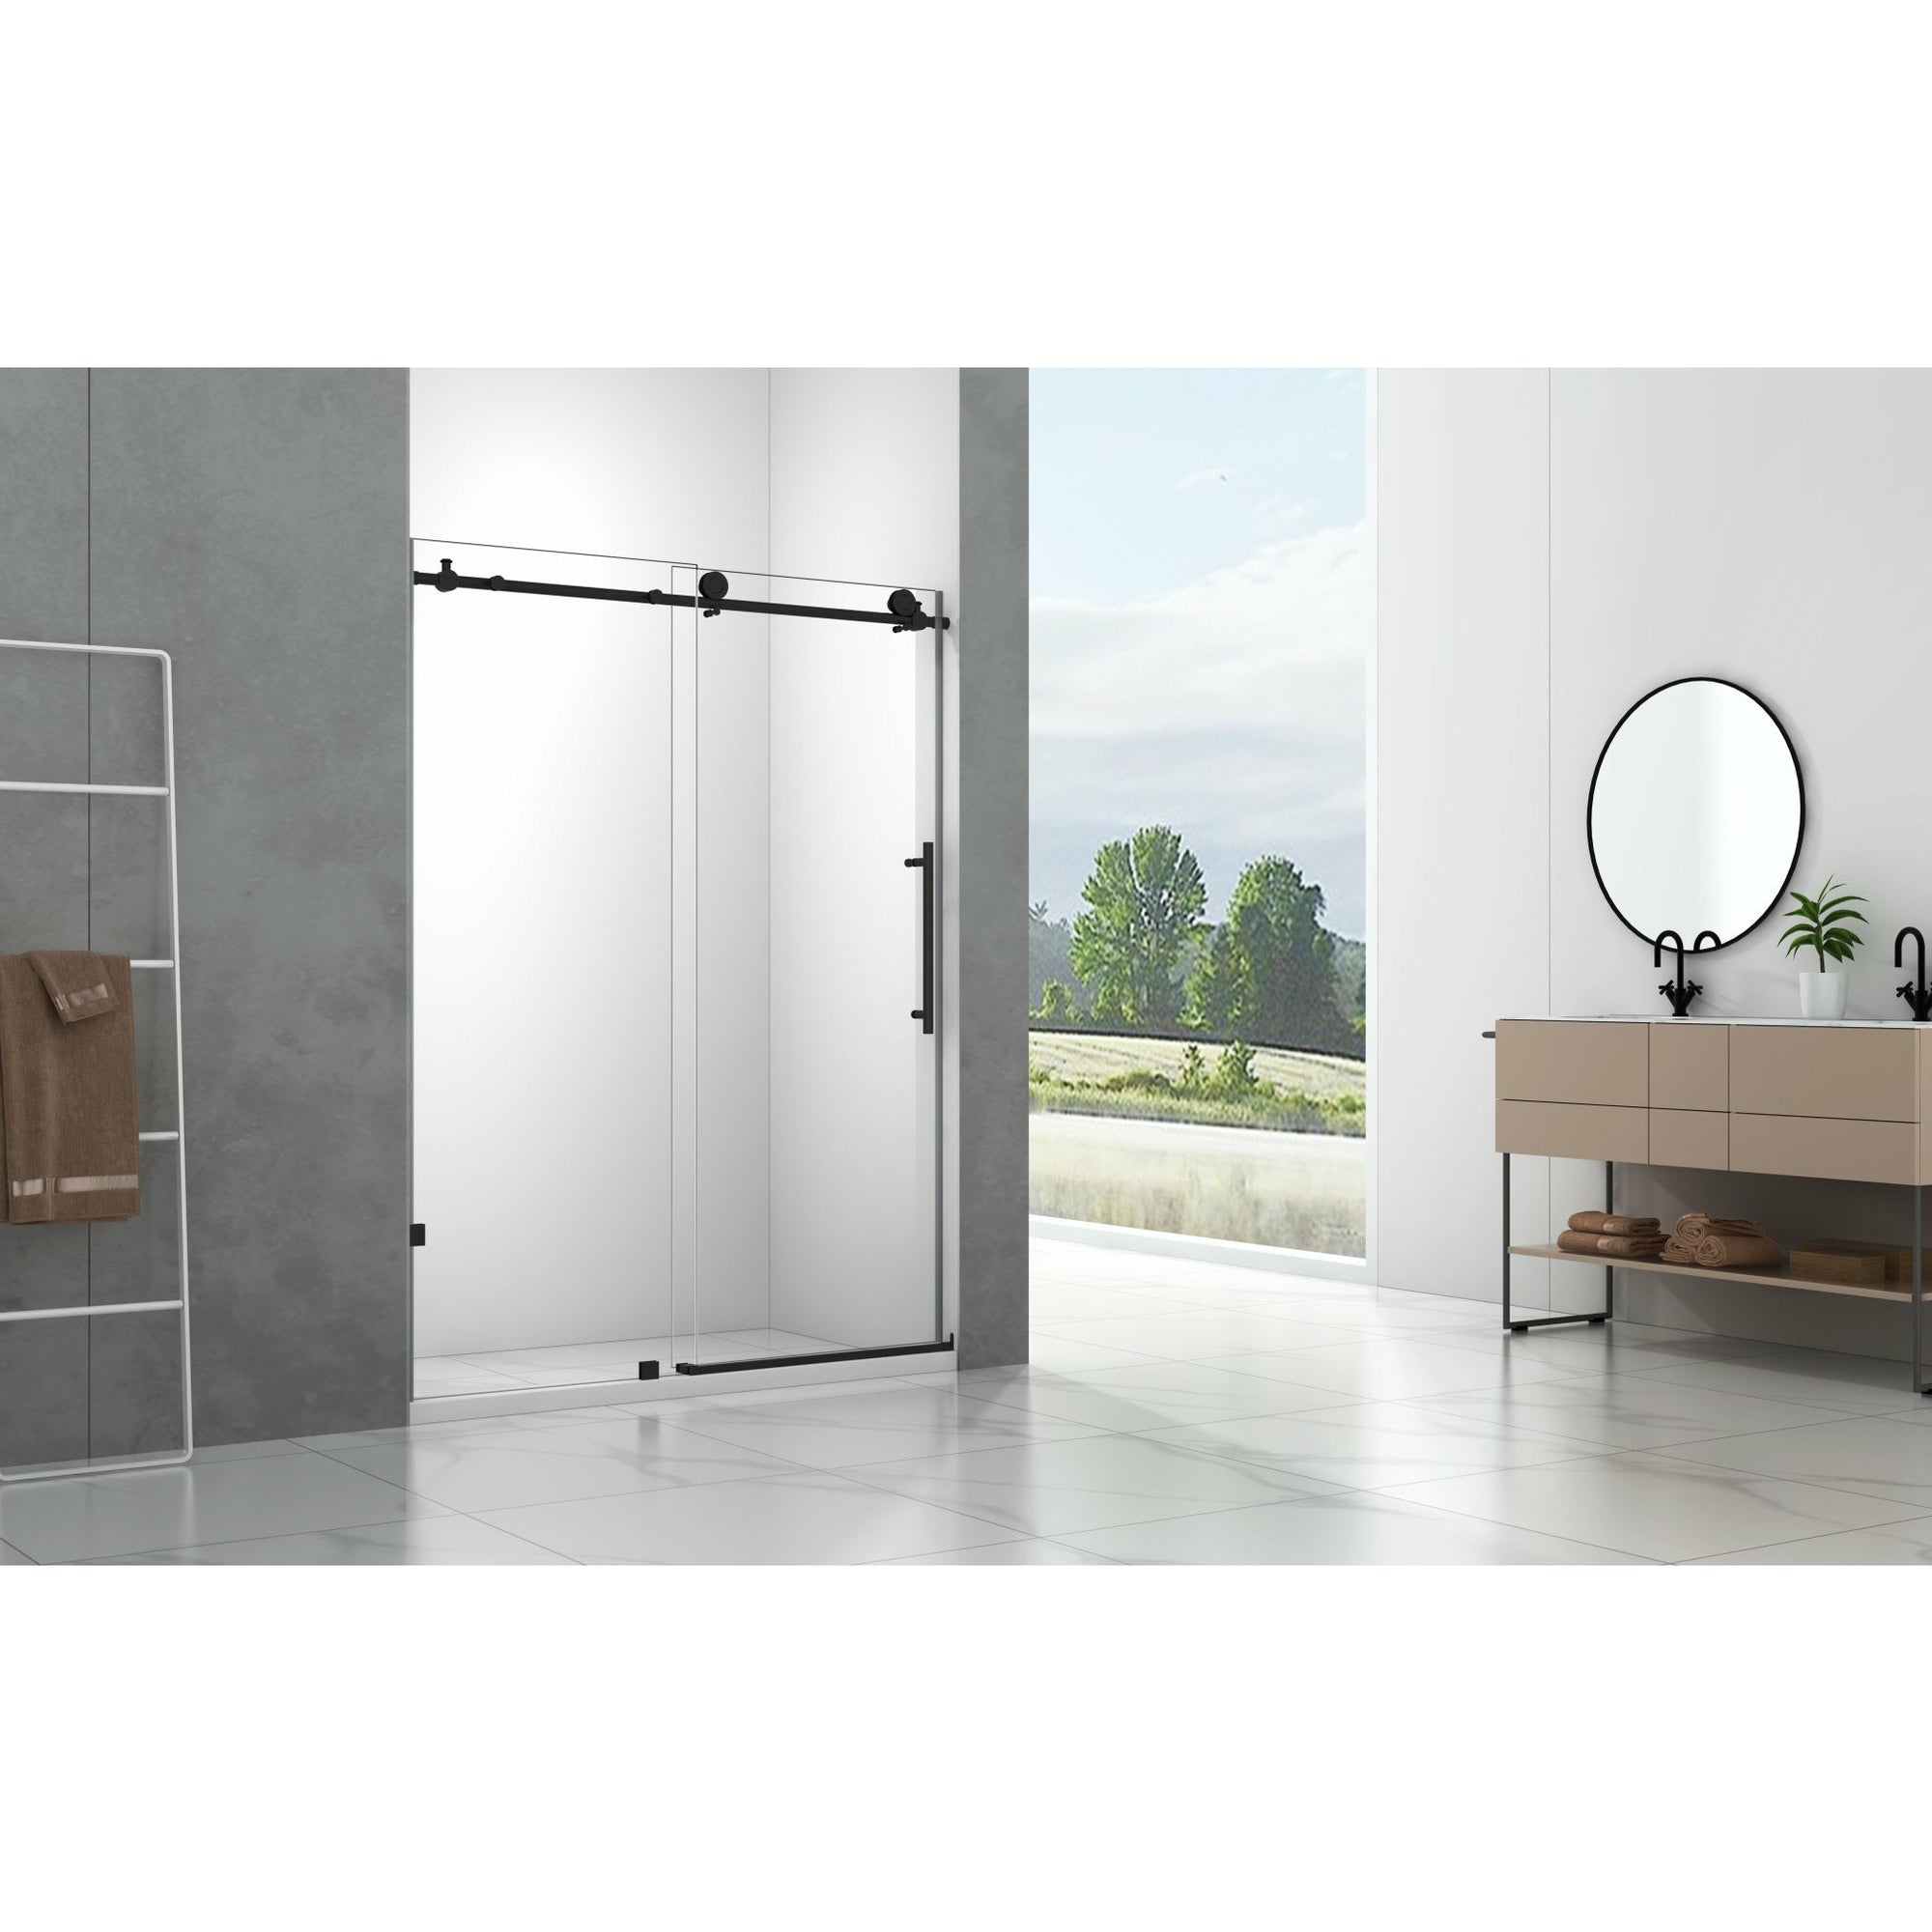 Legion Furniture 61" - 65" Single Sliding Frameless Glass Shower Door Set GD9061-65 - Glass Type: Clear - Stainless Steel Construction - Black - Steel Rollers Closing - Overall size: 65″ W x 75″ H - Lifestyle Setting - GD9061-65 - Vital Hydrotherapy